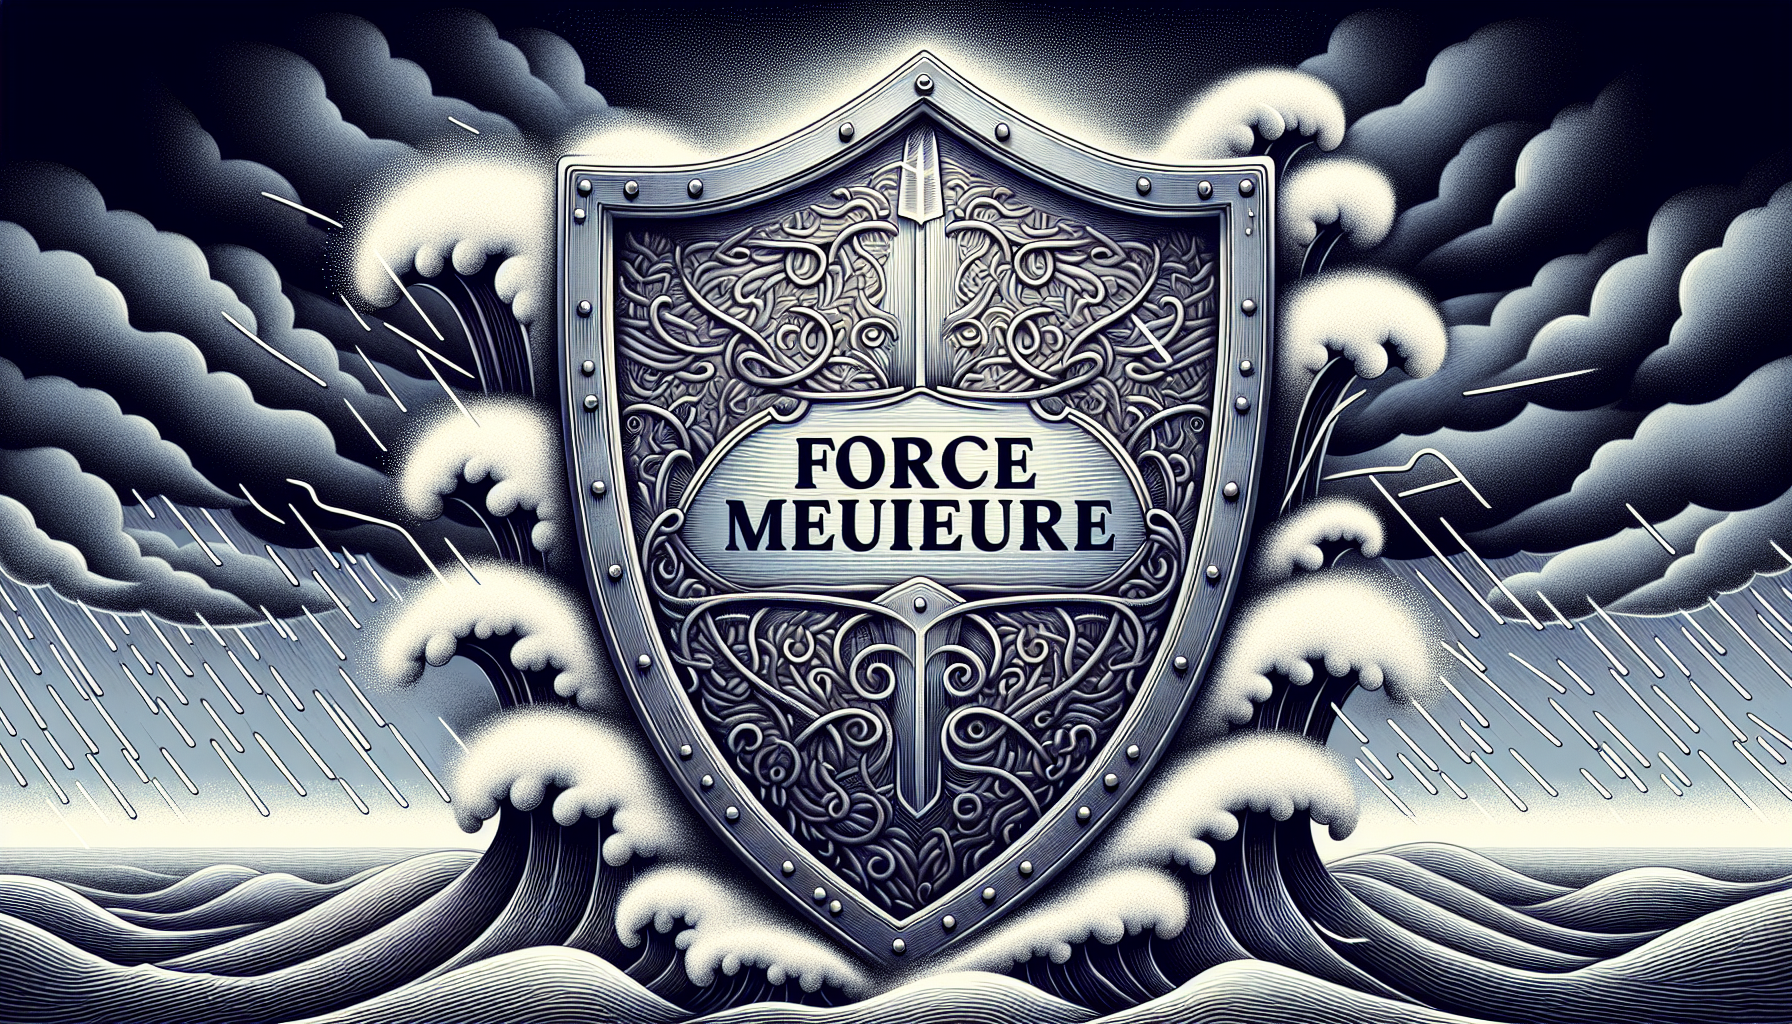 Illustration of a shield with 'force majeure' written on it